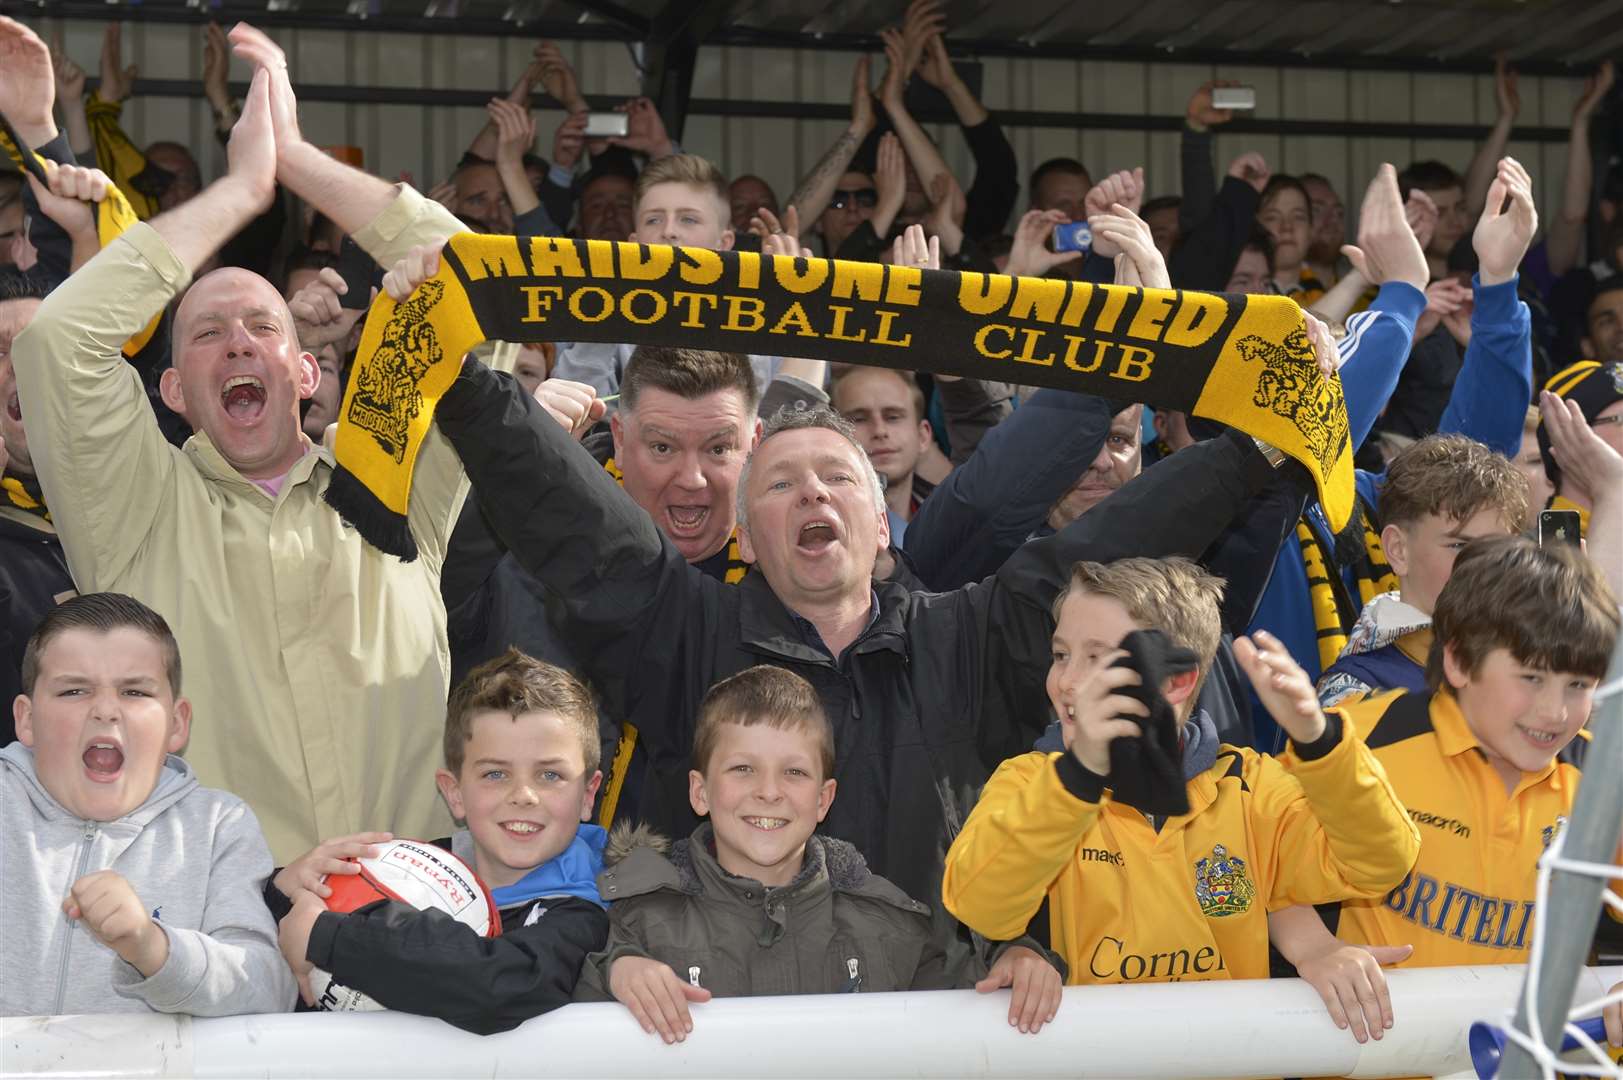 Maidstone United must extend its stadium capacity to 4,000 if promoted to the Conference Premier, now called the National League